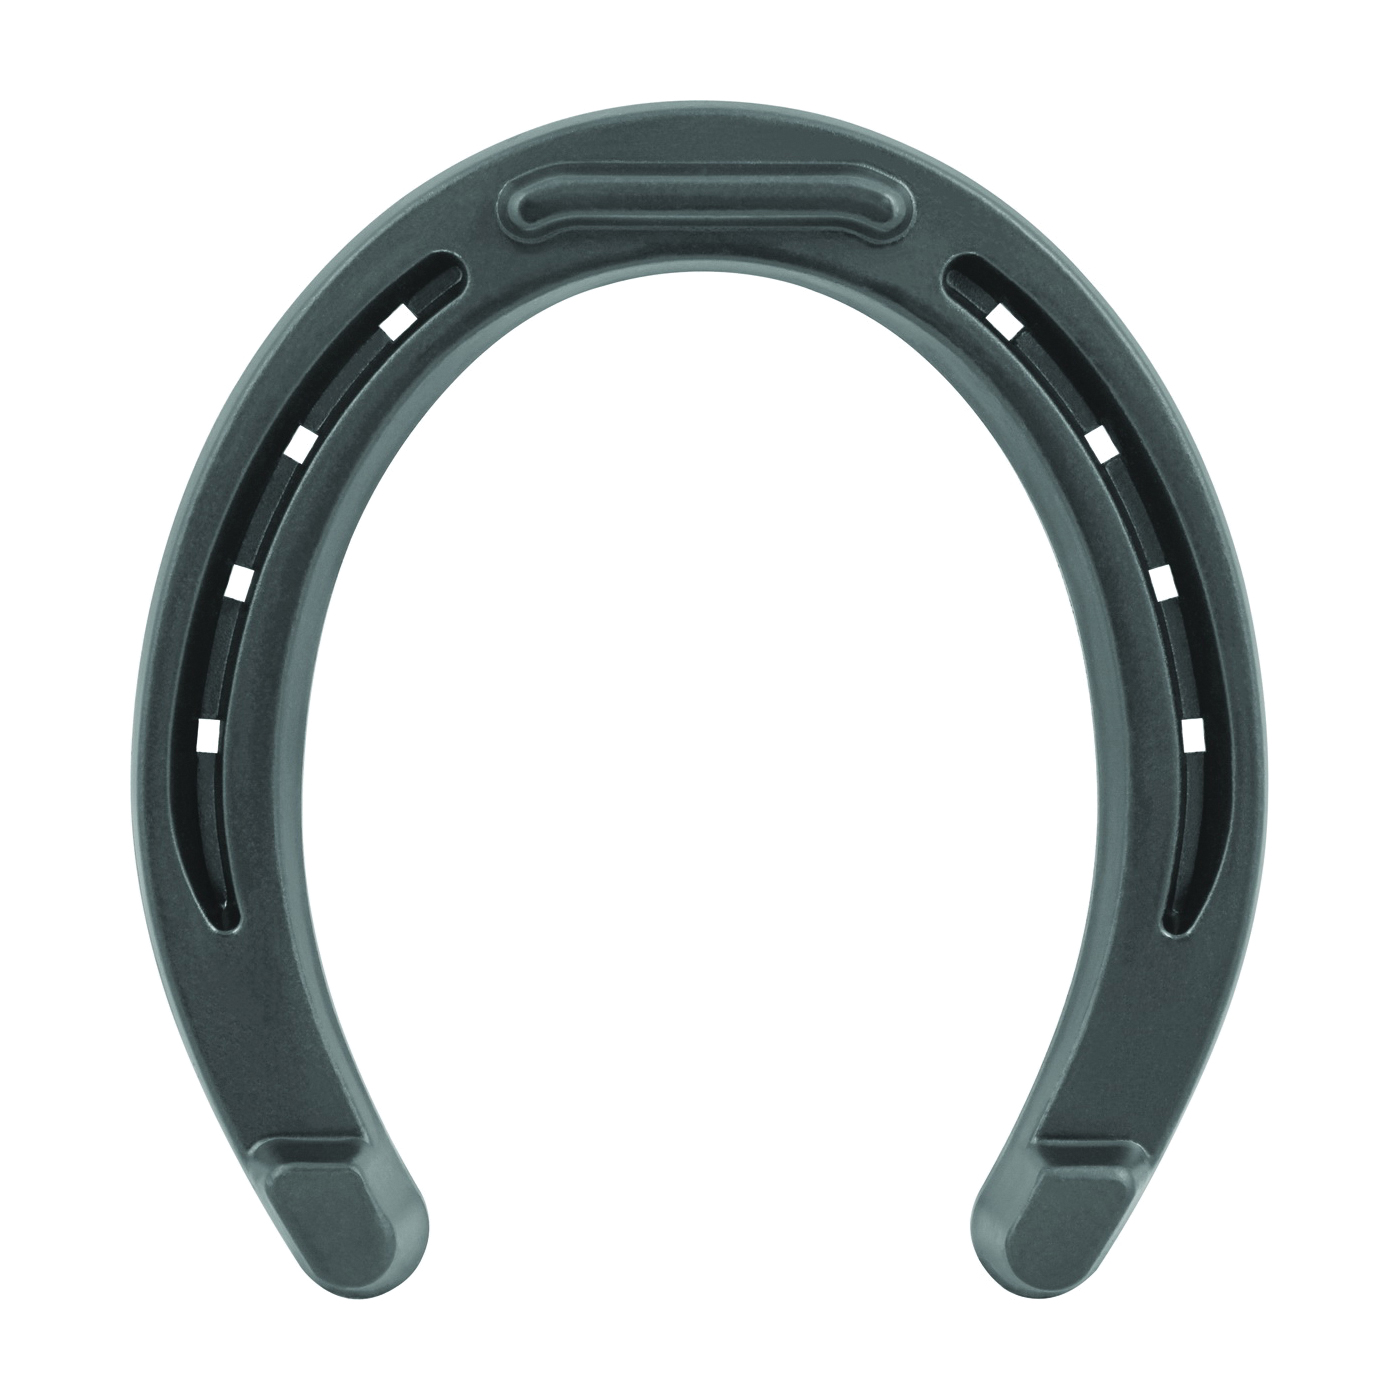 Diamond Farrier Classic Plain Horseshoes, Size 00, 4 pk. at Tractor Supply  Co.